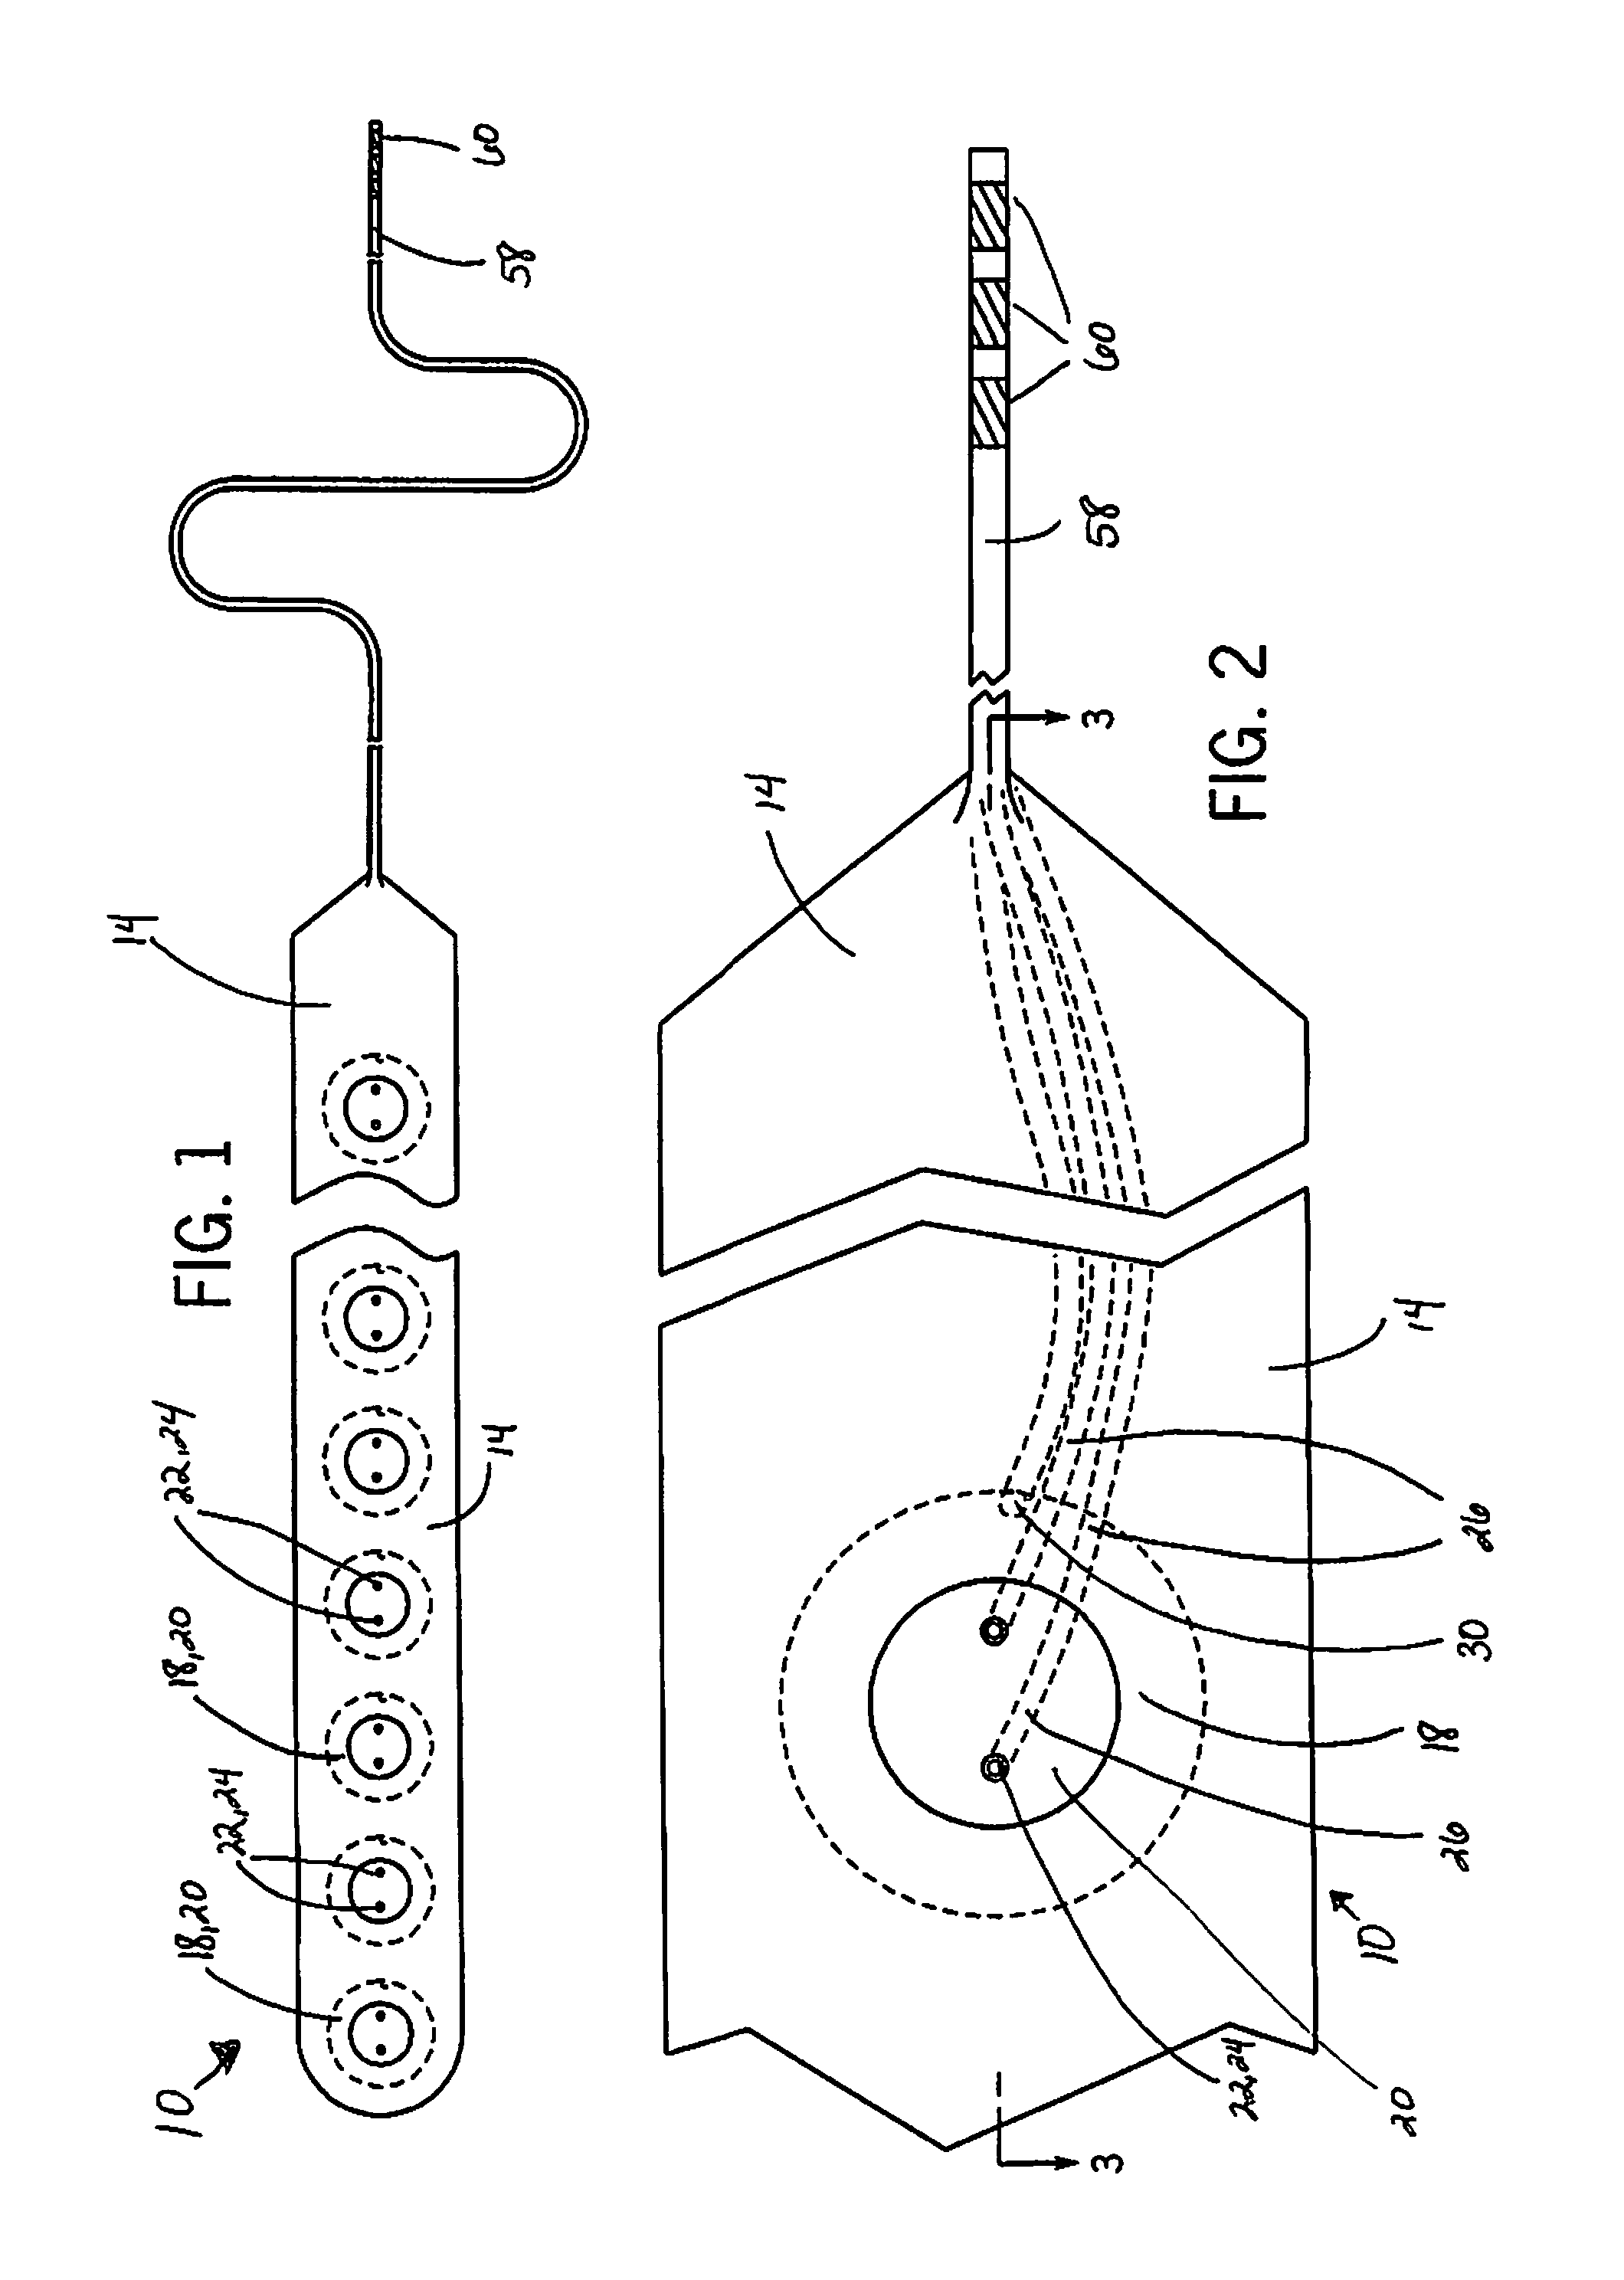 Intracranial sensing and monitoring device with macro and micro electrodes